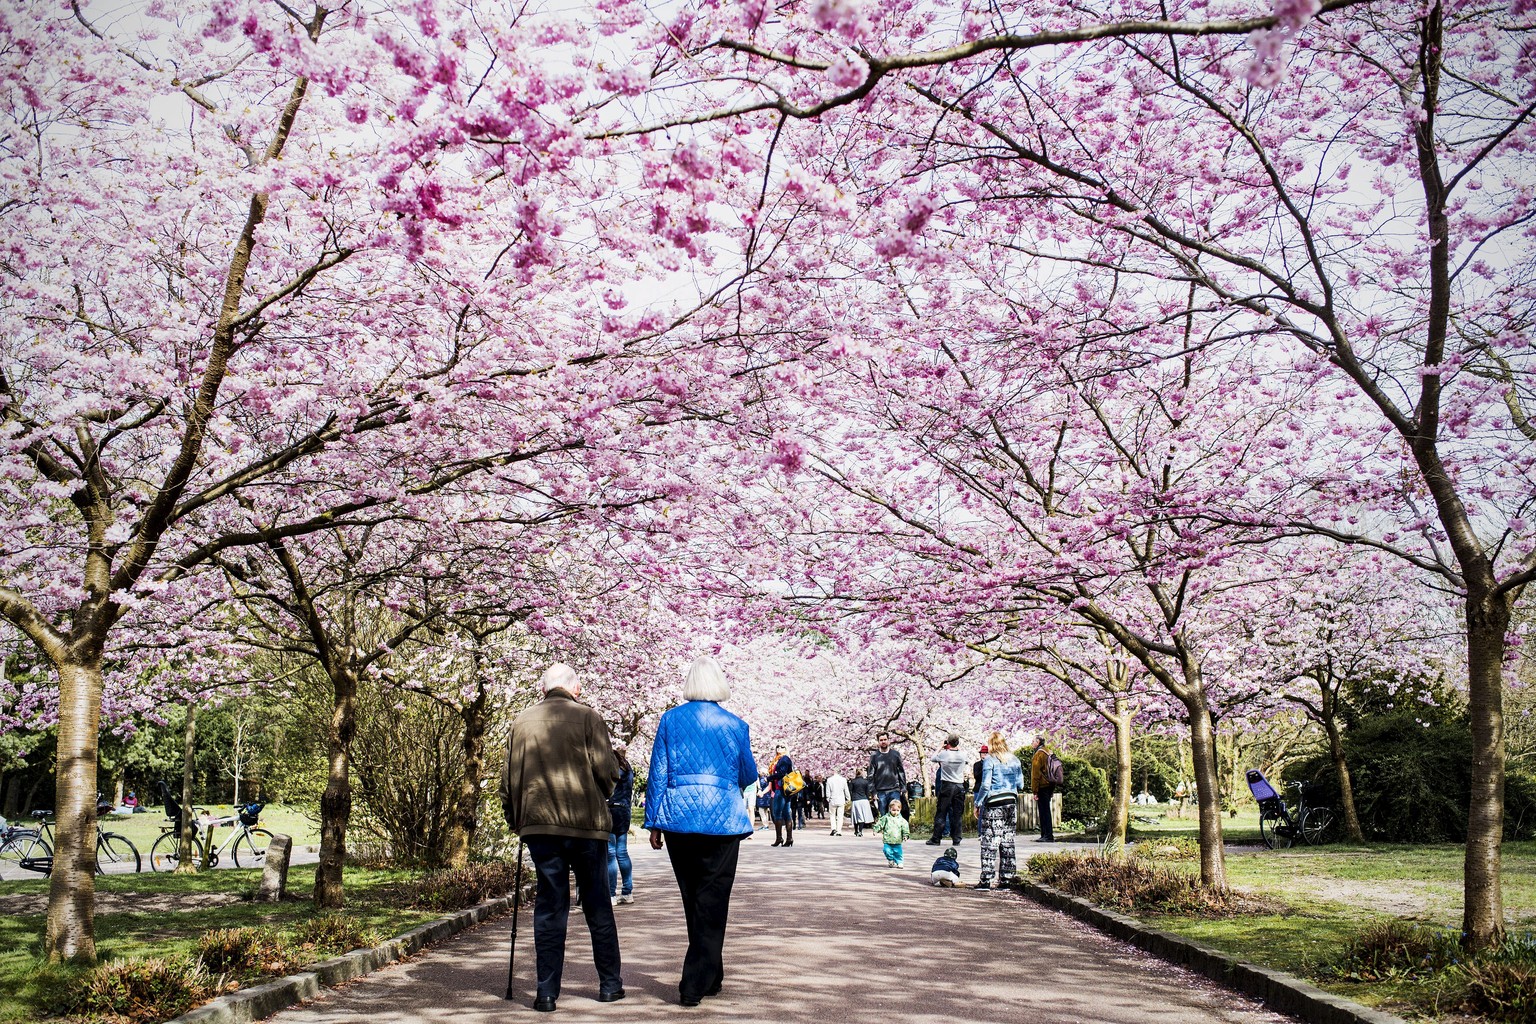 People walk along an avenue of blossoming cherry trees at the cemetary of Bispebjerg in Copenhagen April 21, 2015. REUTERS/Sophia Juliane Lydolph/Scanpix Denmark 

ATTENTION EDITORS - THIS IMAGE HAS B ...